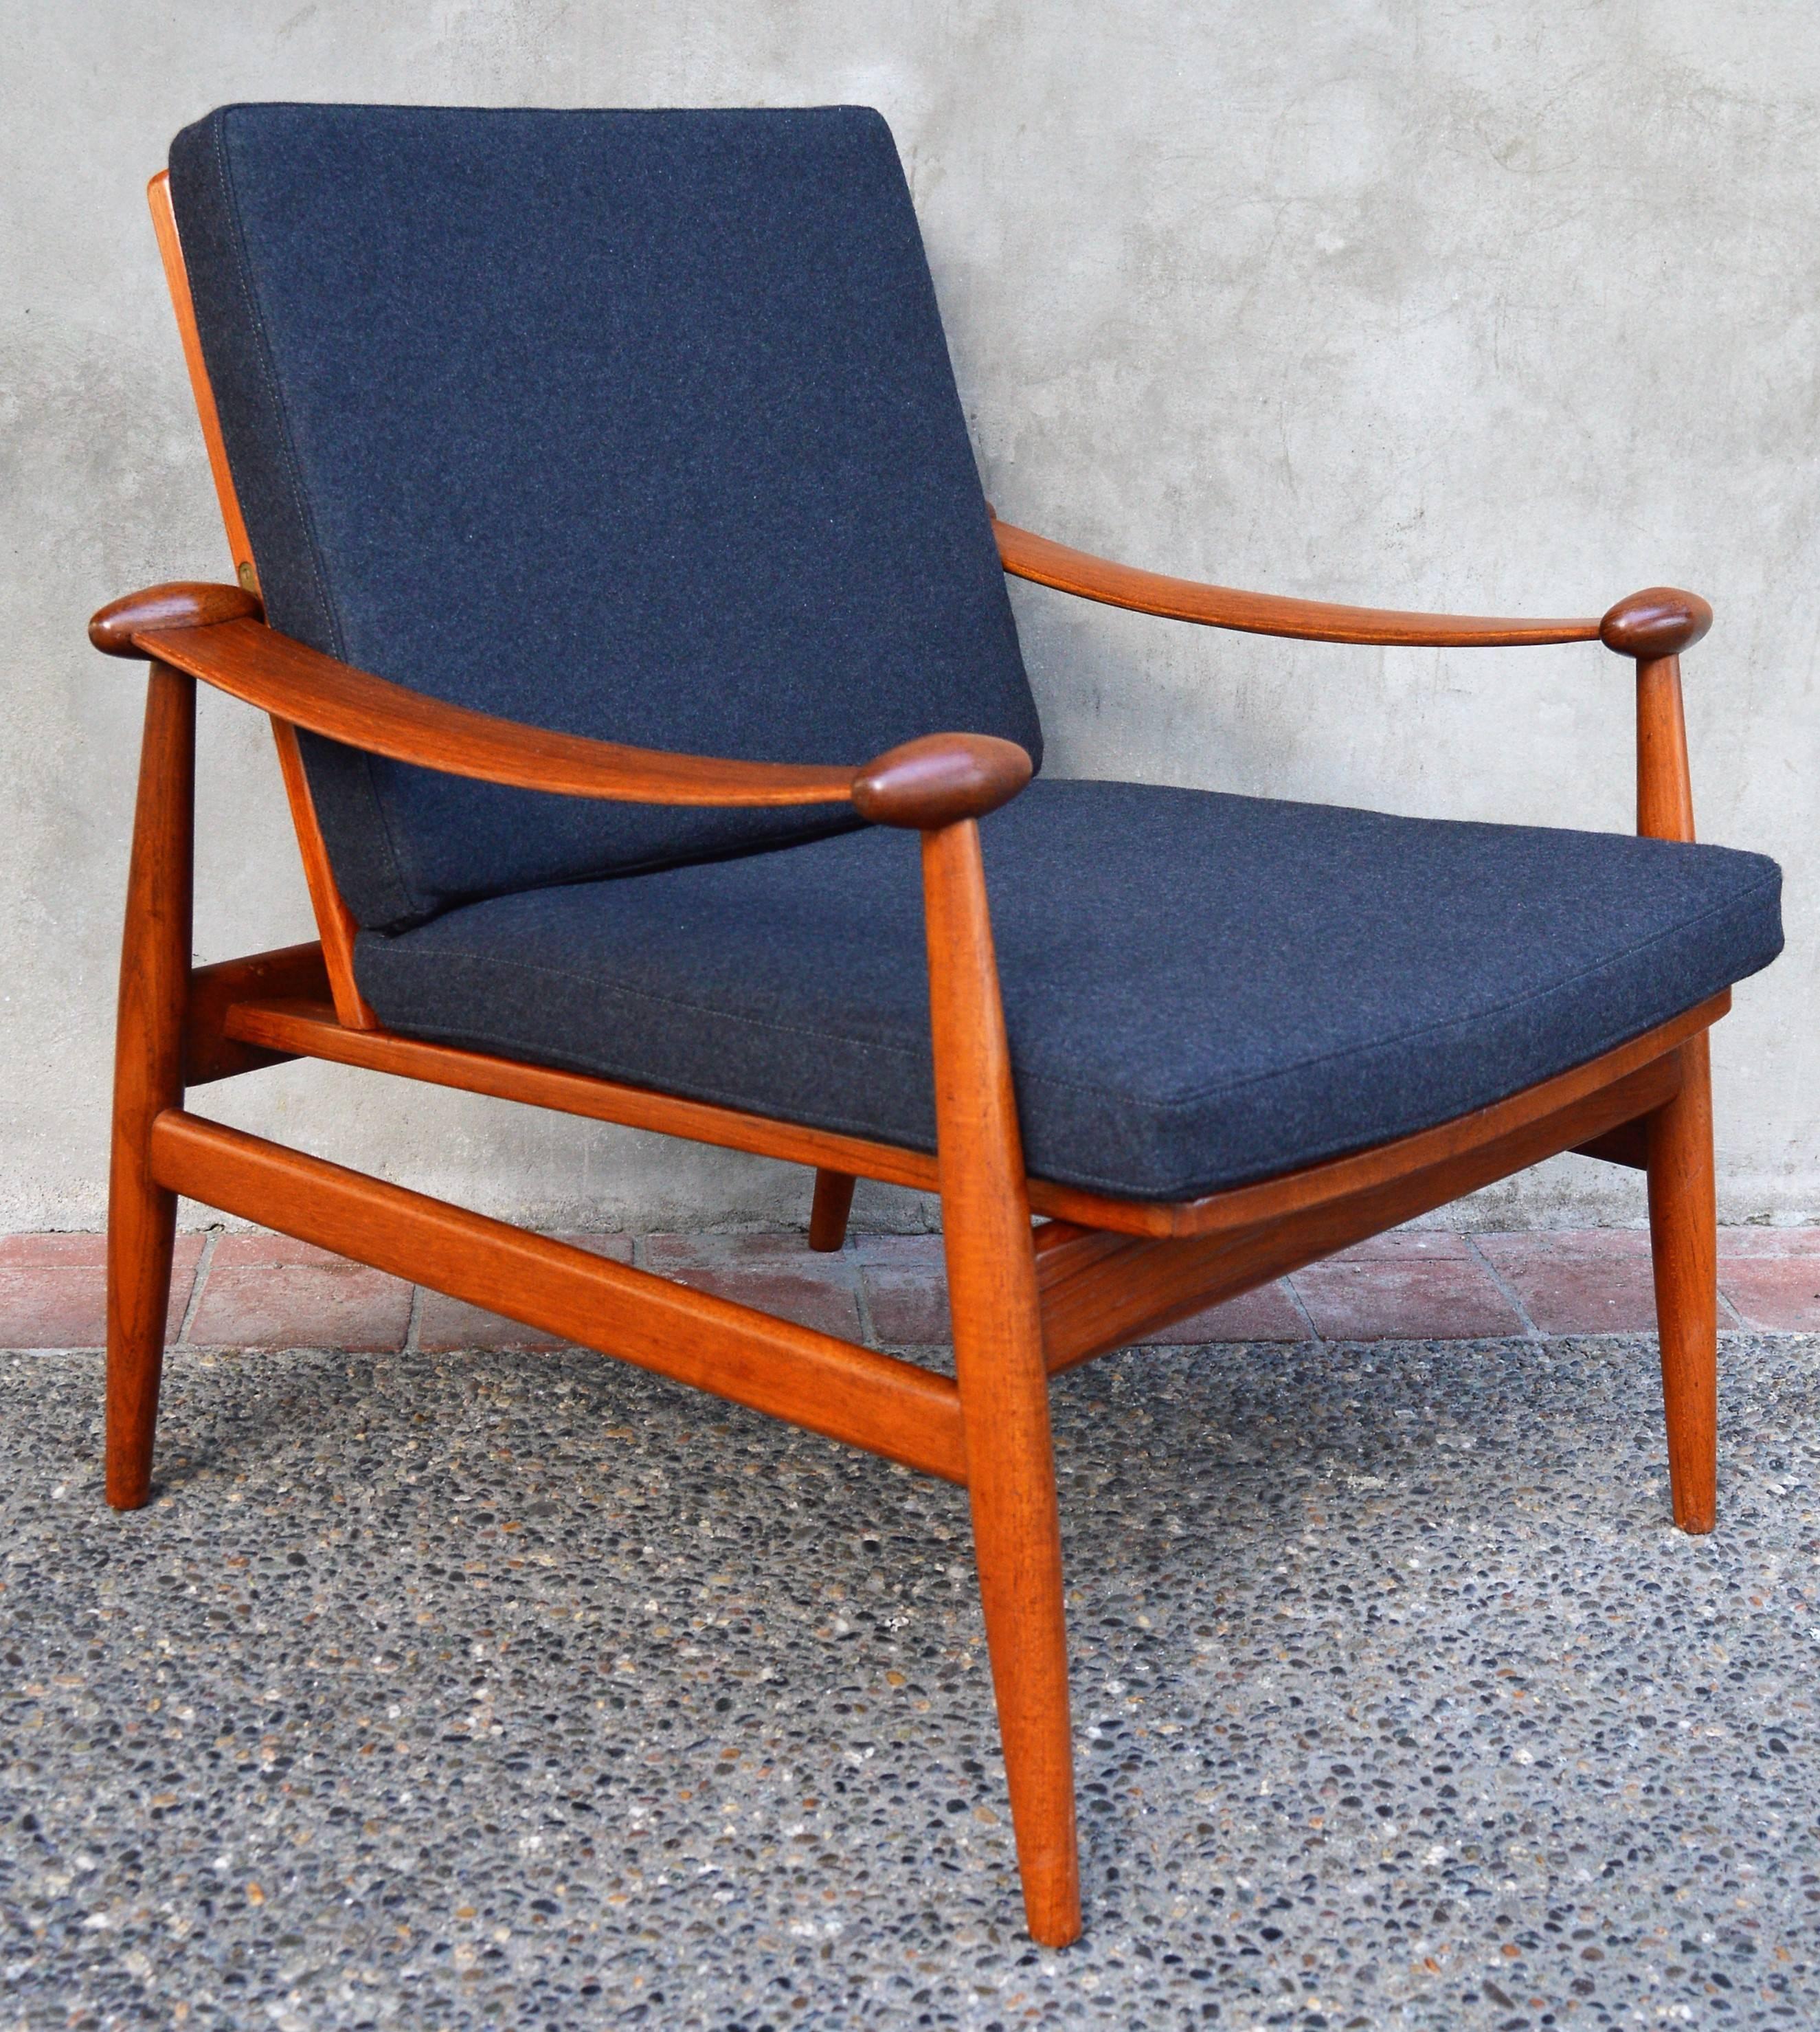 This iconic Danish modern early teak frame Spade lounge chair Model 133 was designed by Finn Juhl for France & Daverkosen (the earlier incarnation of France & Son) in the 1950s. The subtle gorgeous detailing abounds, such as the arced and curved